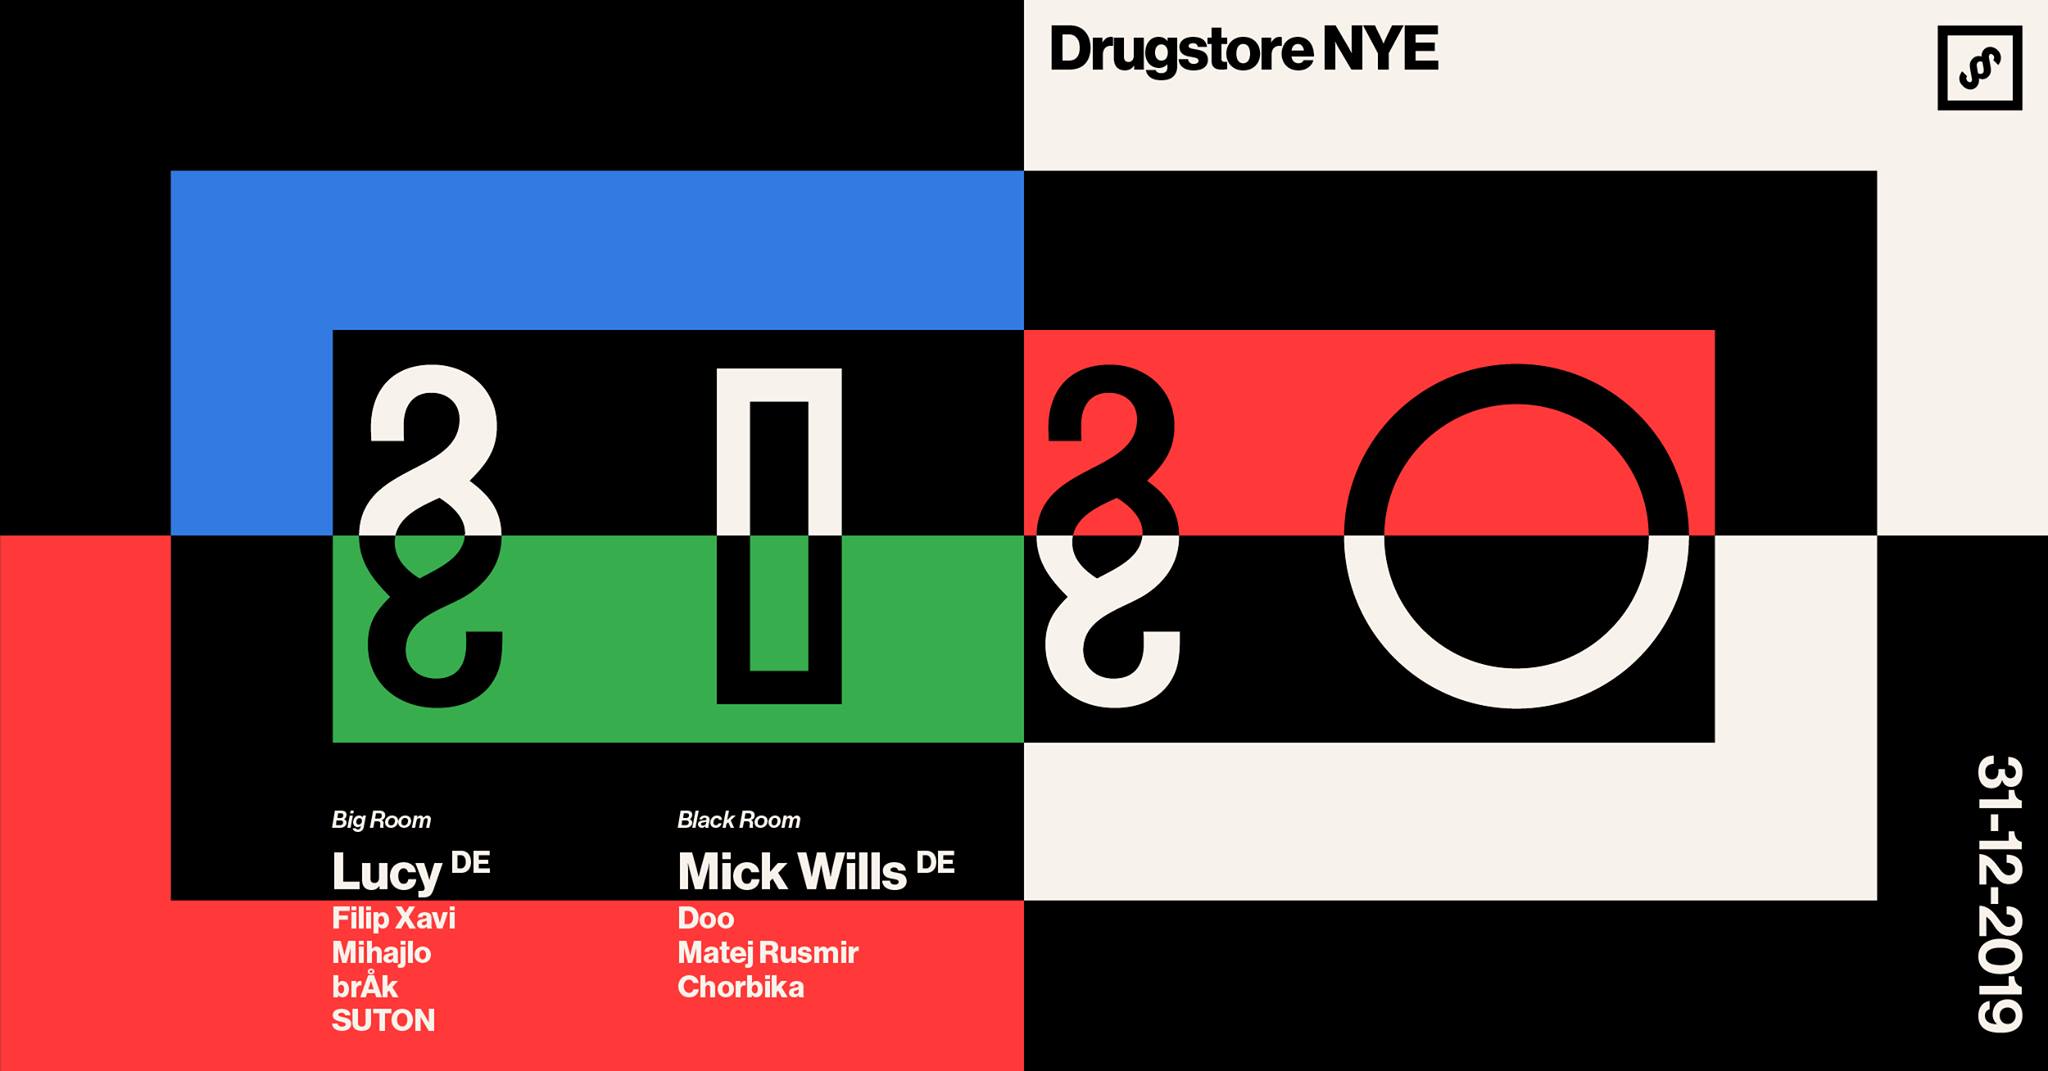 Drugstore NYE 2020 with Lucy and Mick Wills